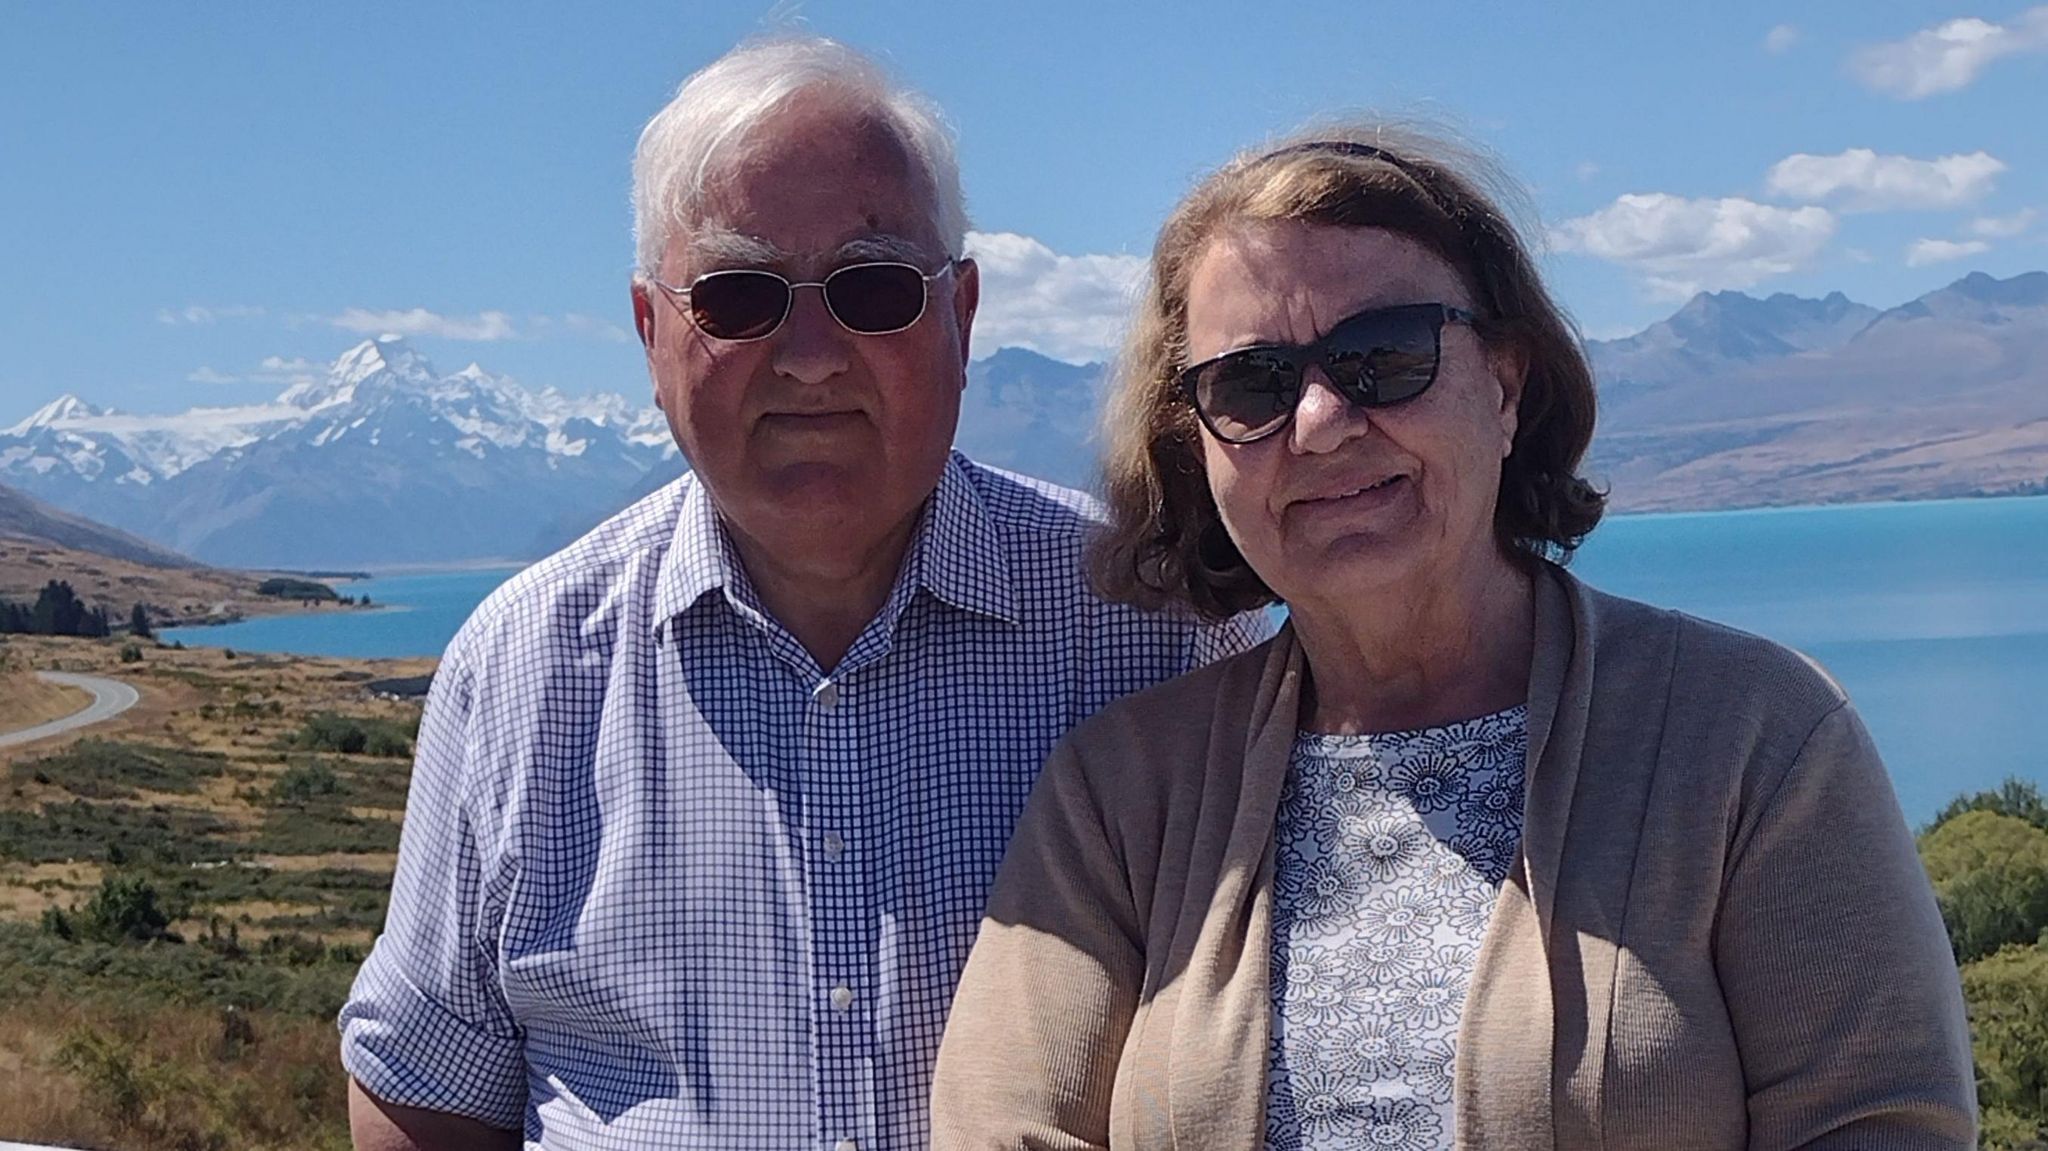 Marten Clarke and Lesley Clarke in New Zealand, both smiling and wearing sunglasses